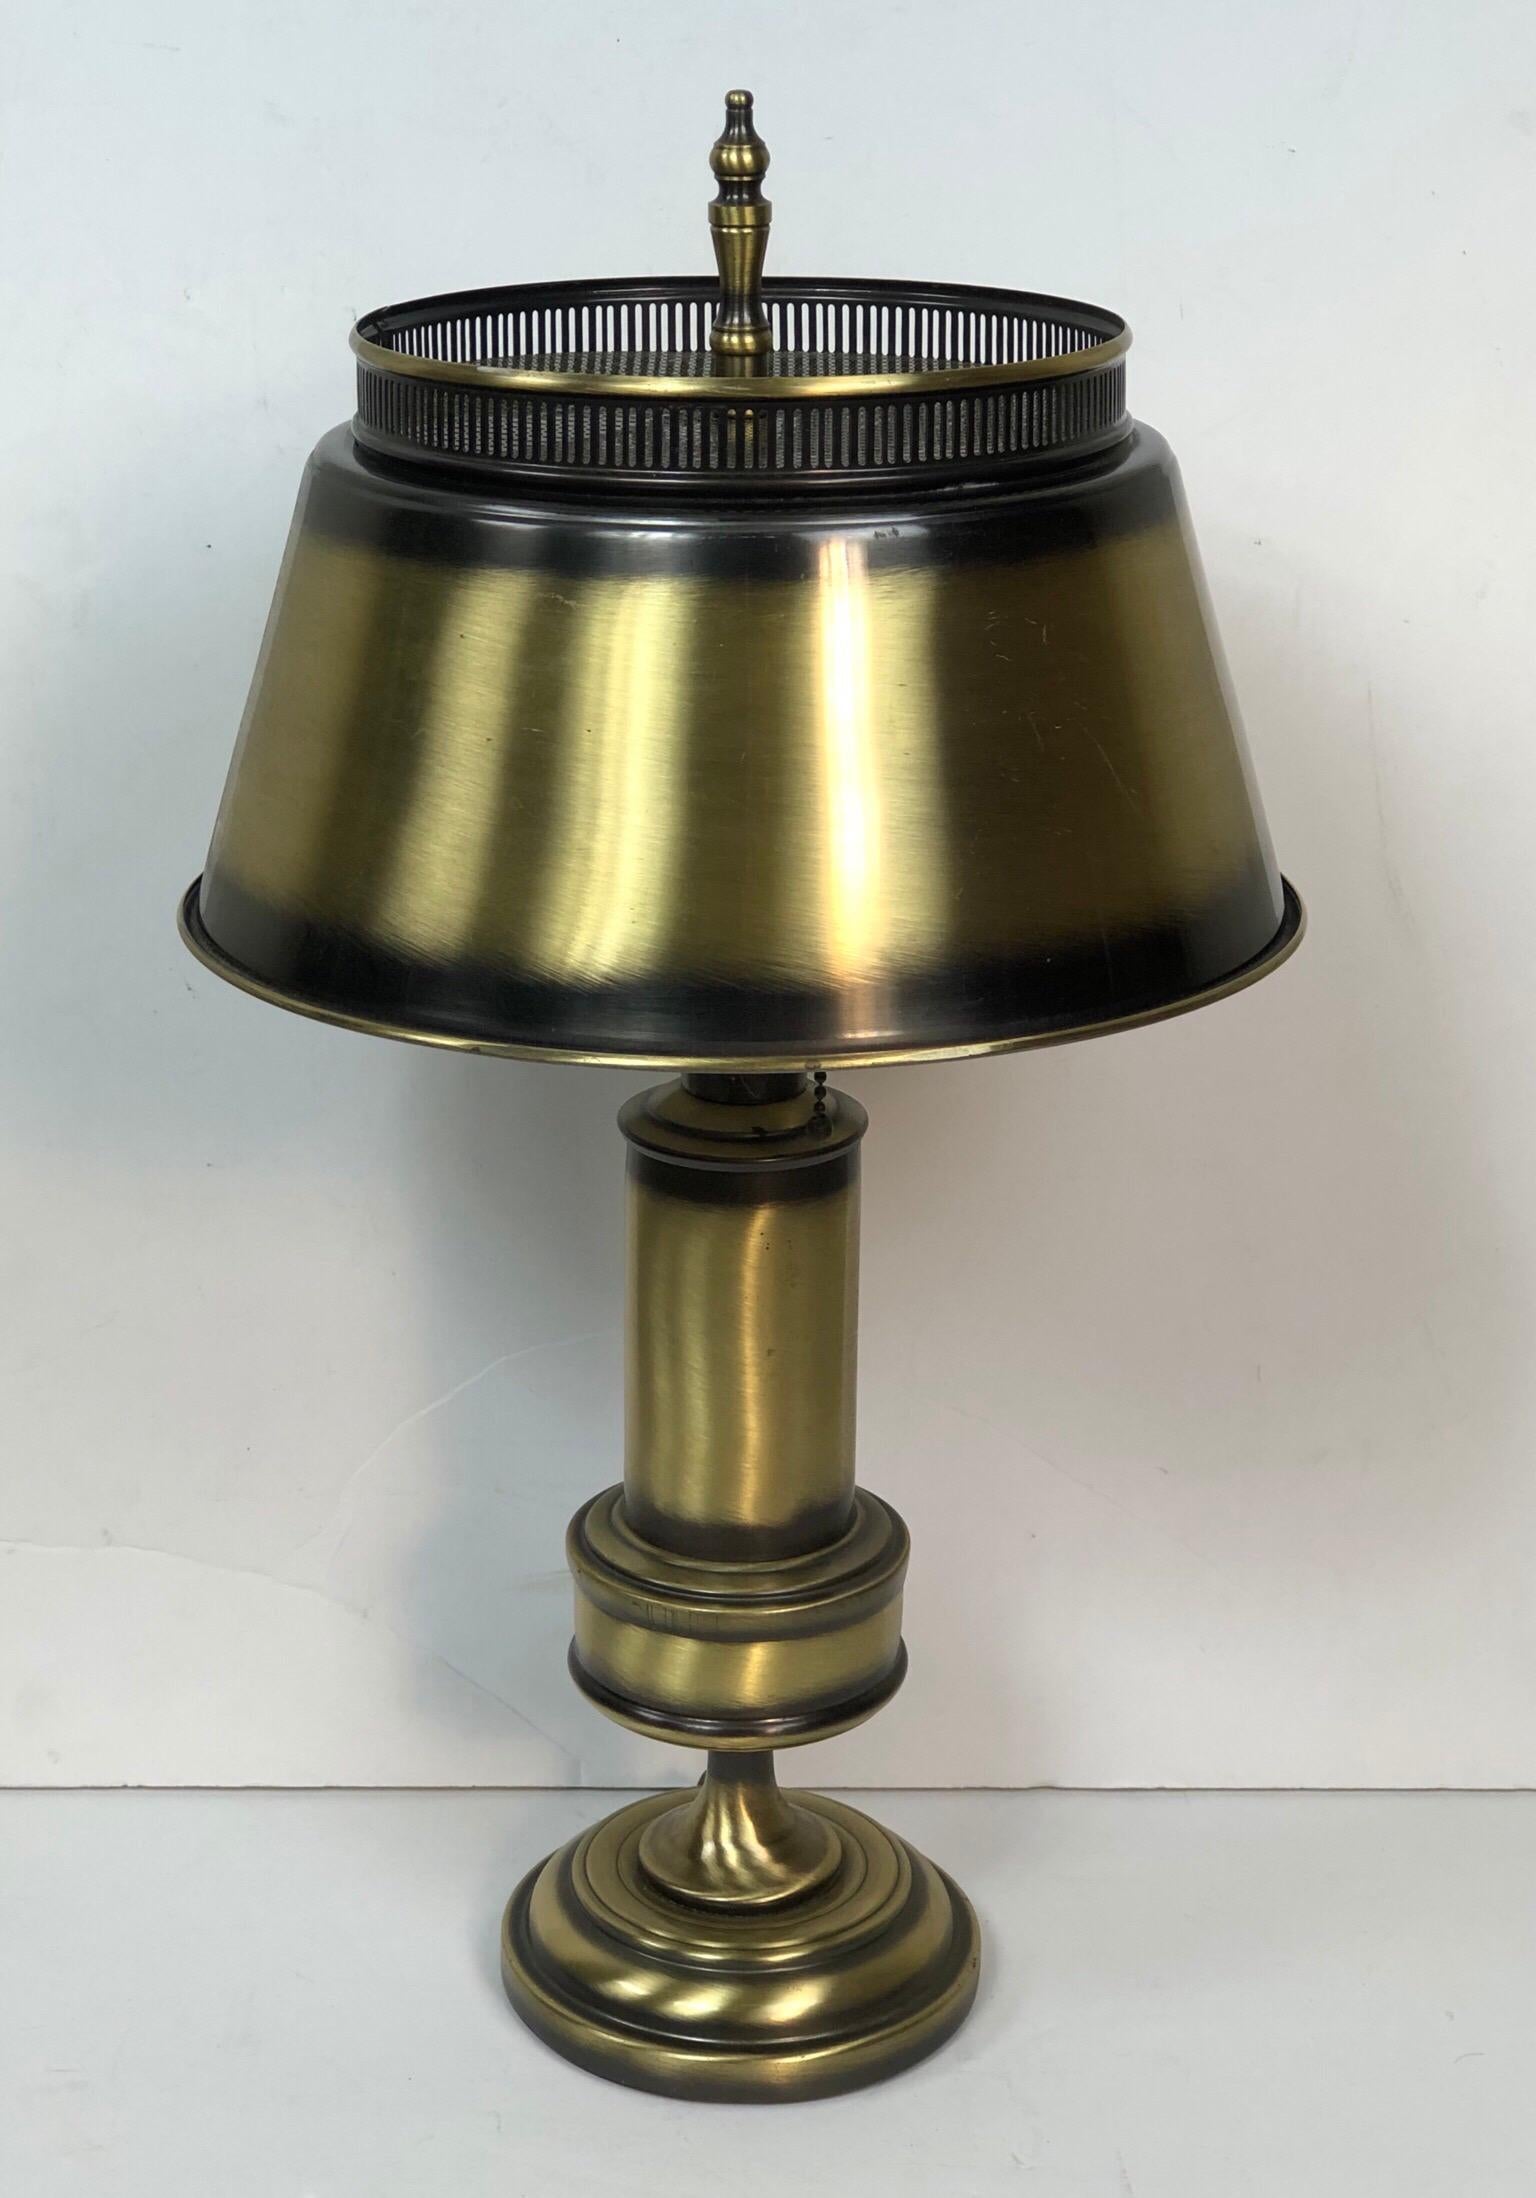 Vintage 1960s burnished brass table or desk lamp with a round metal shade. The lamp is wired for the US and in working condition. The lamp takes two bulbs and is unmarked.